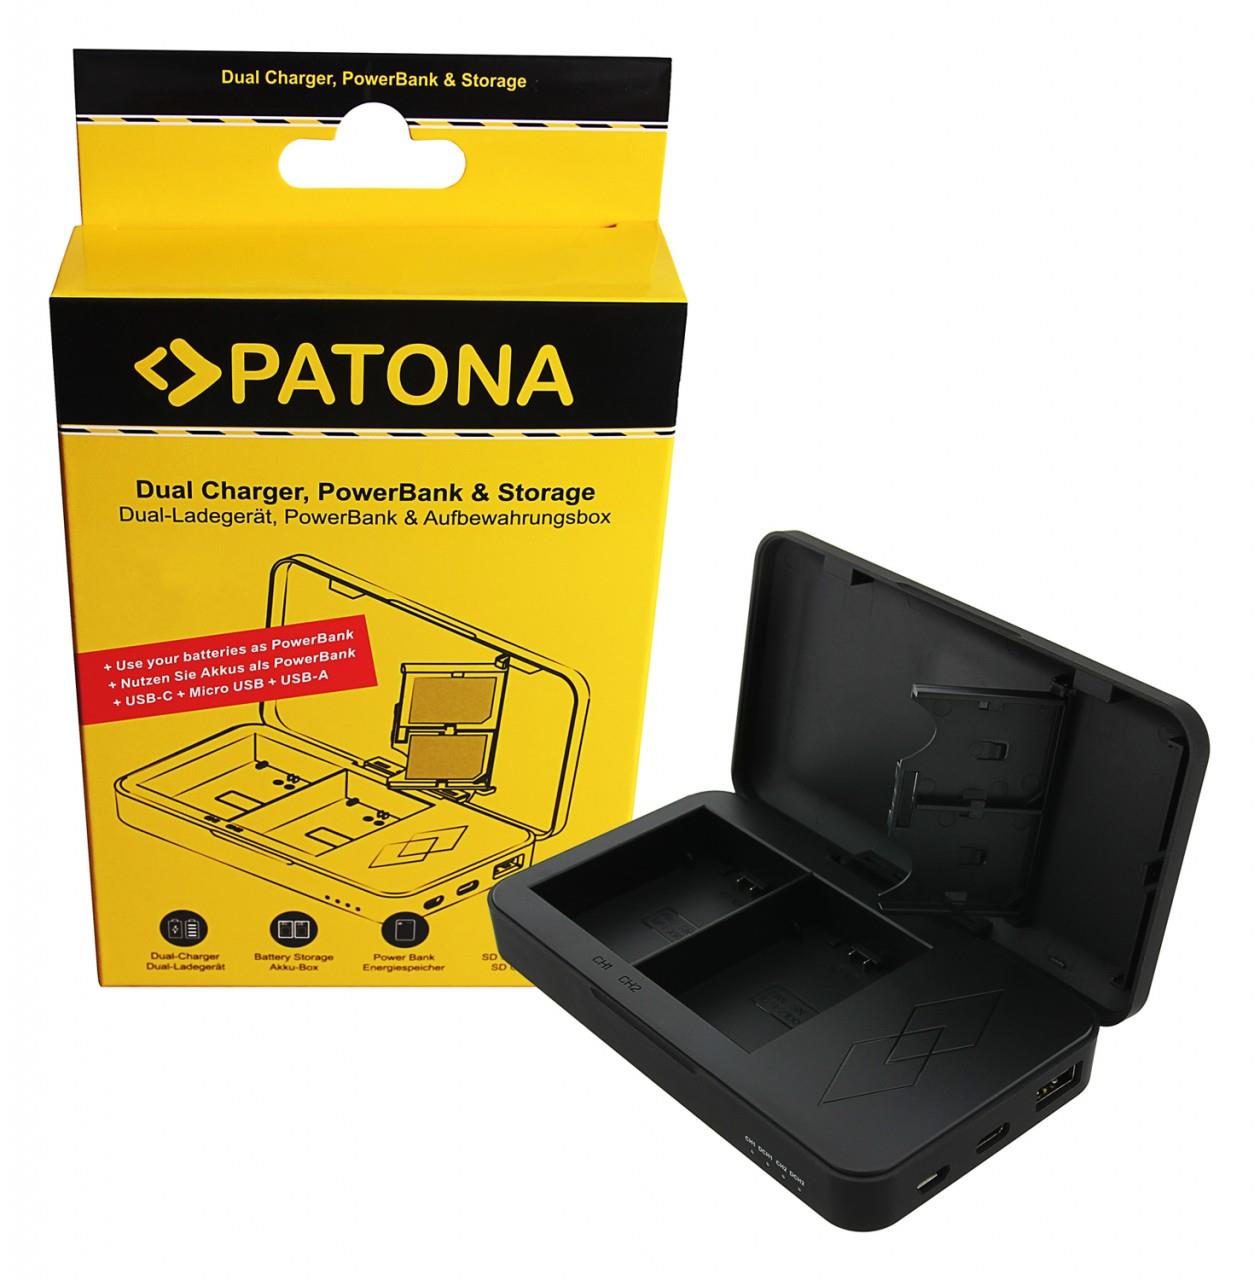 PATONA Dual charger with Powerbank function and memory card storage for Sony NP-FZ100